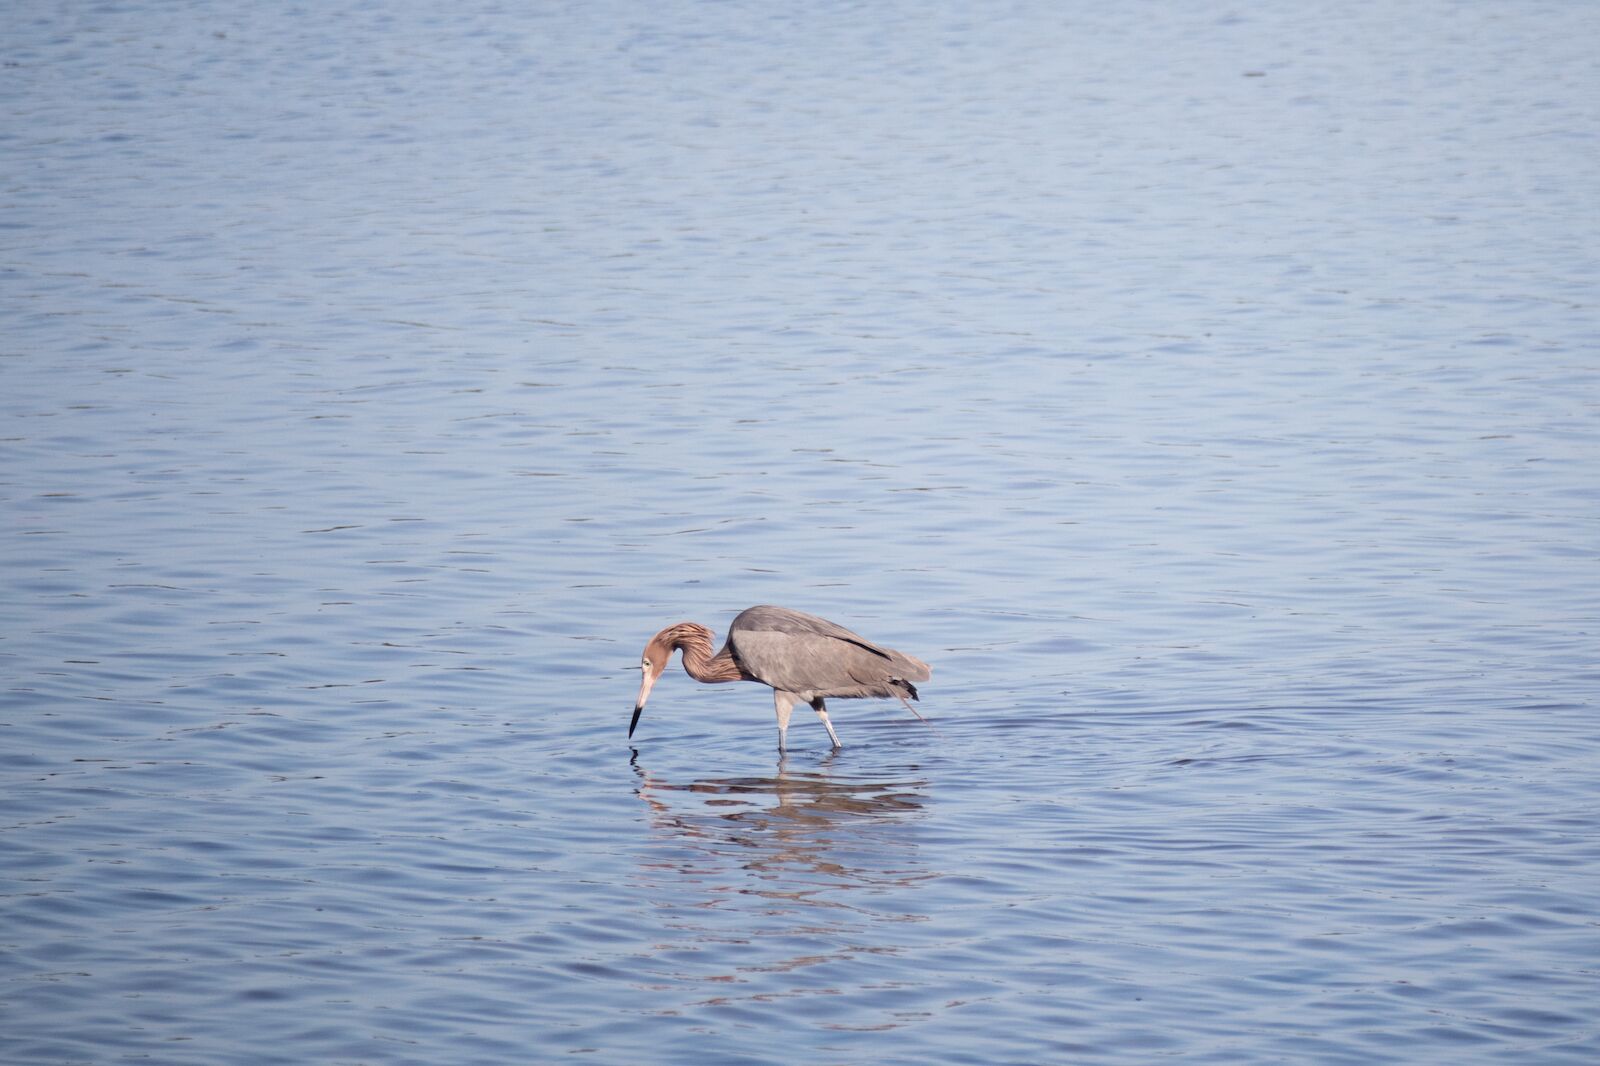 A reddish egret in the water at Ding Darling near Fort Myers